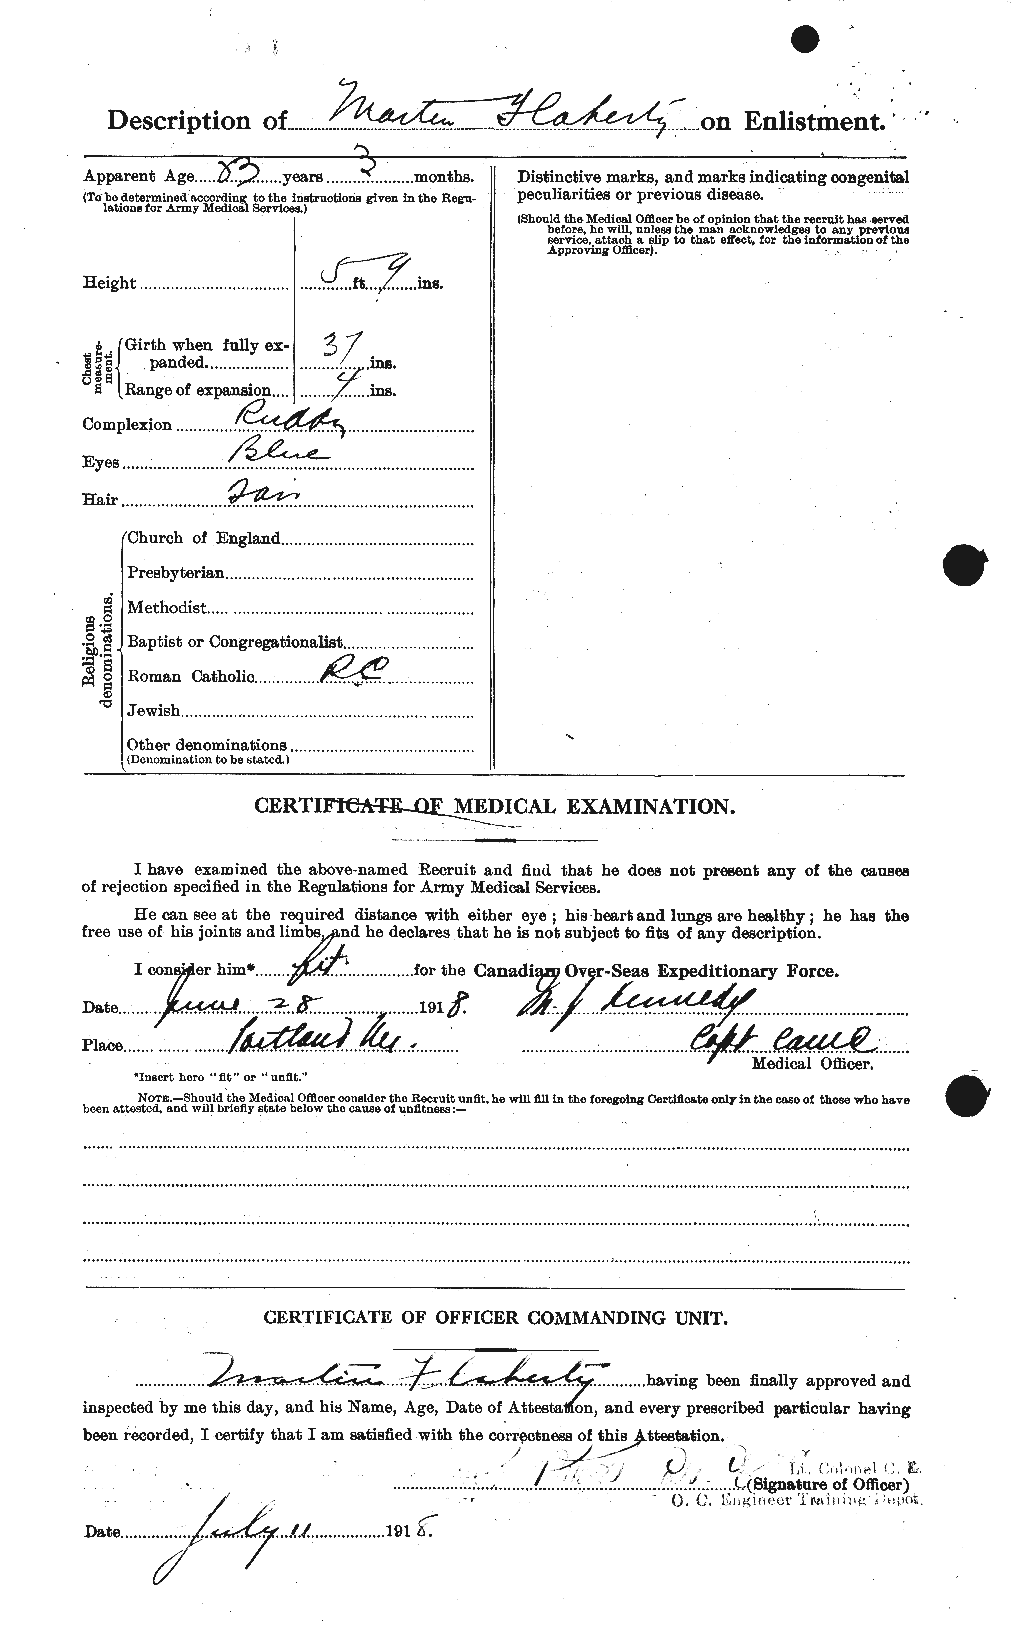 Personnel Records of the First World War - CEF 323370b